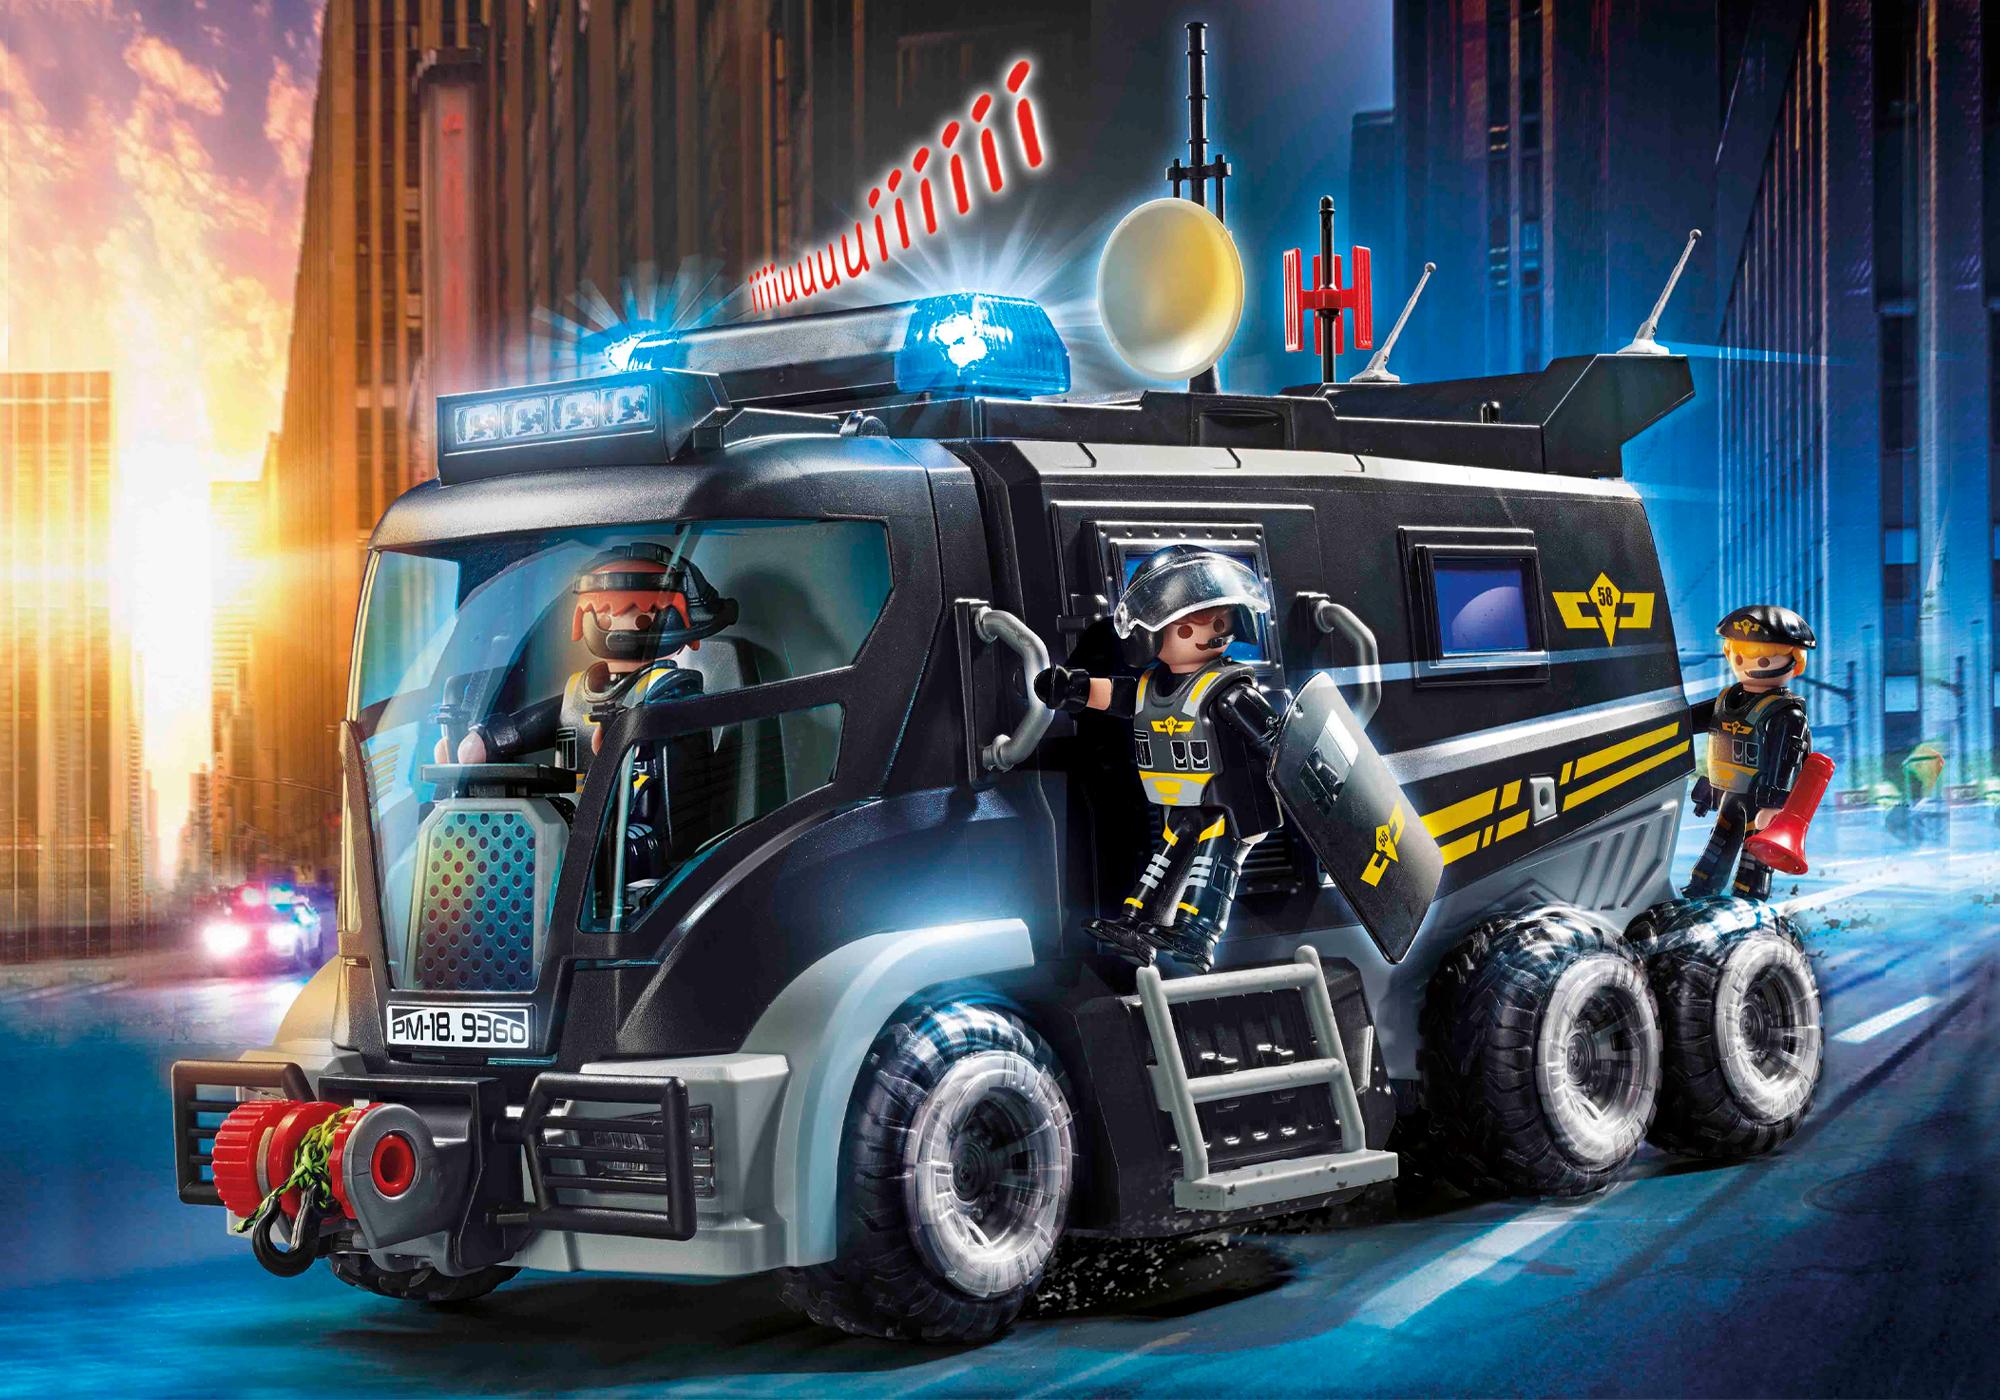 forces speciales police playmobil